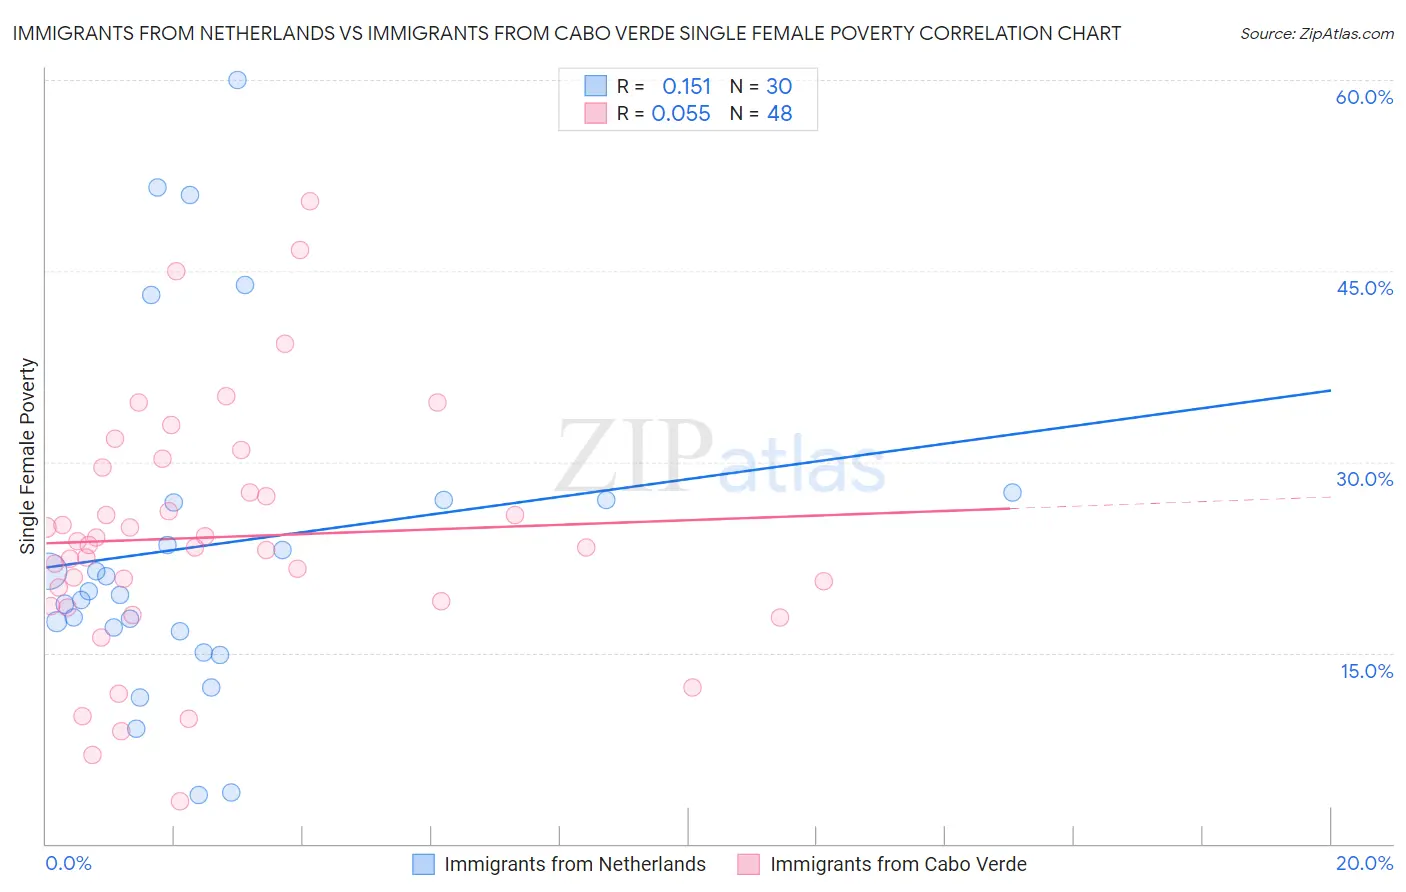 Immigrants from Netherlands vs Immigrants from Cabo Verde Single Female Poverty